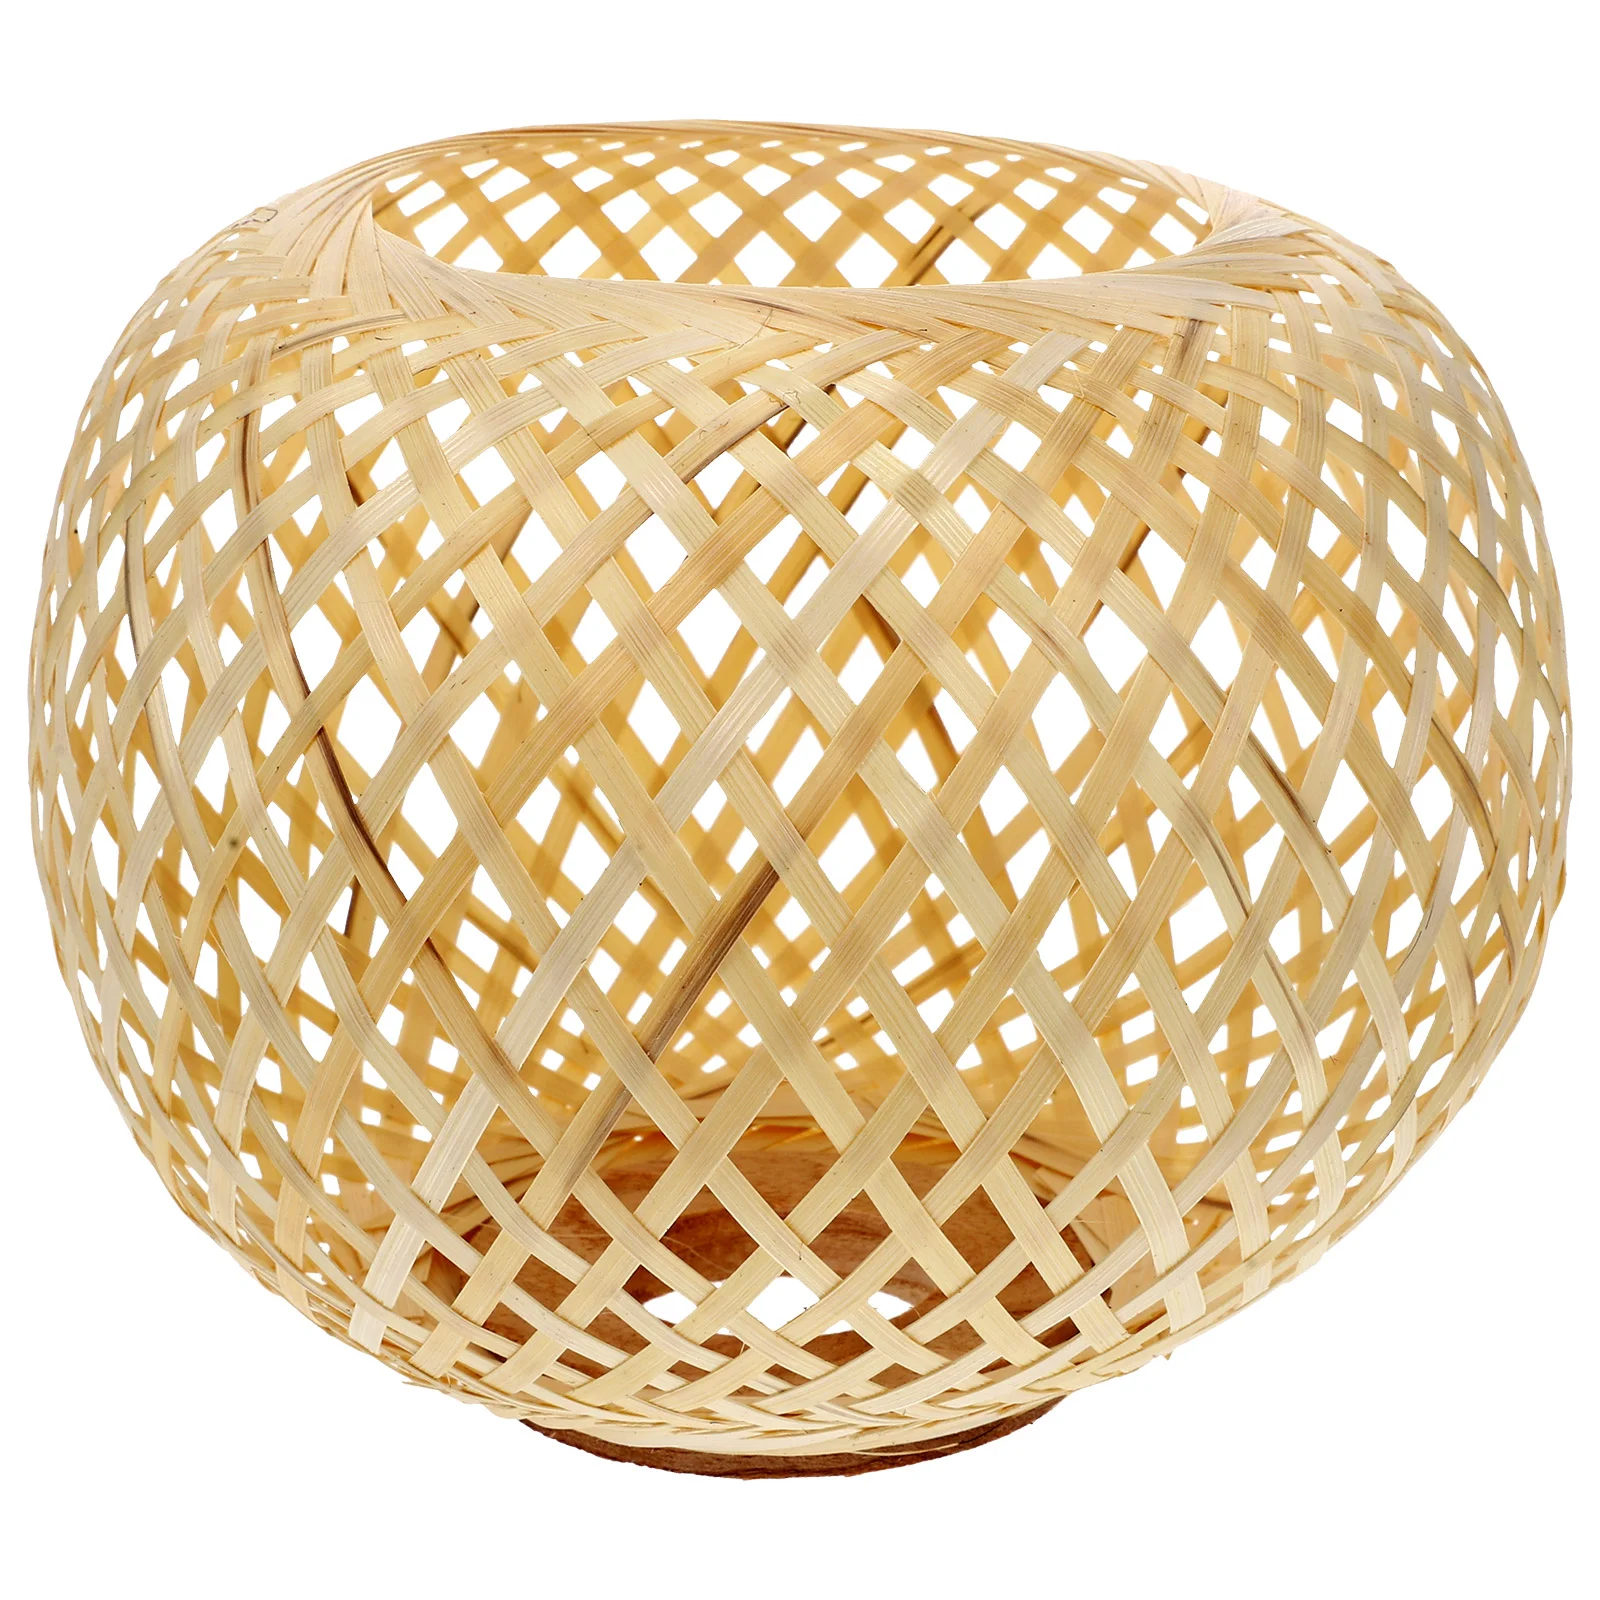 Woven Bamboo Lampshade Light Bulb Cage Guard Rattan Basket Chandelier Lamp Shade Light Cover